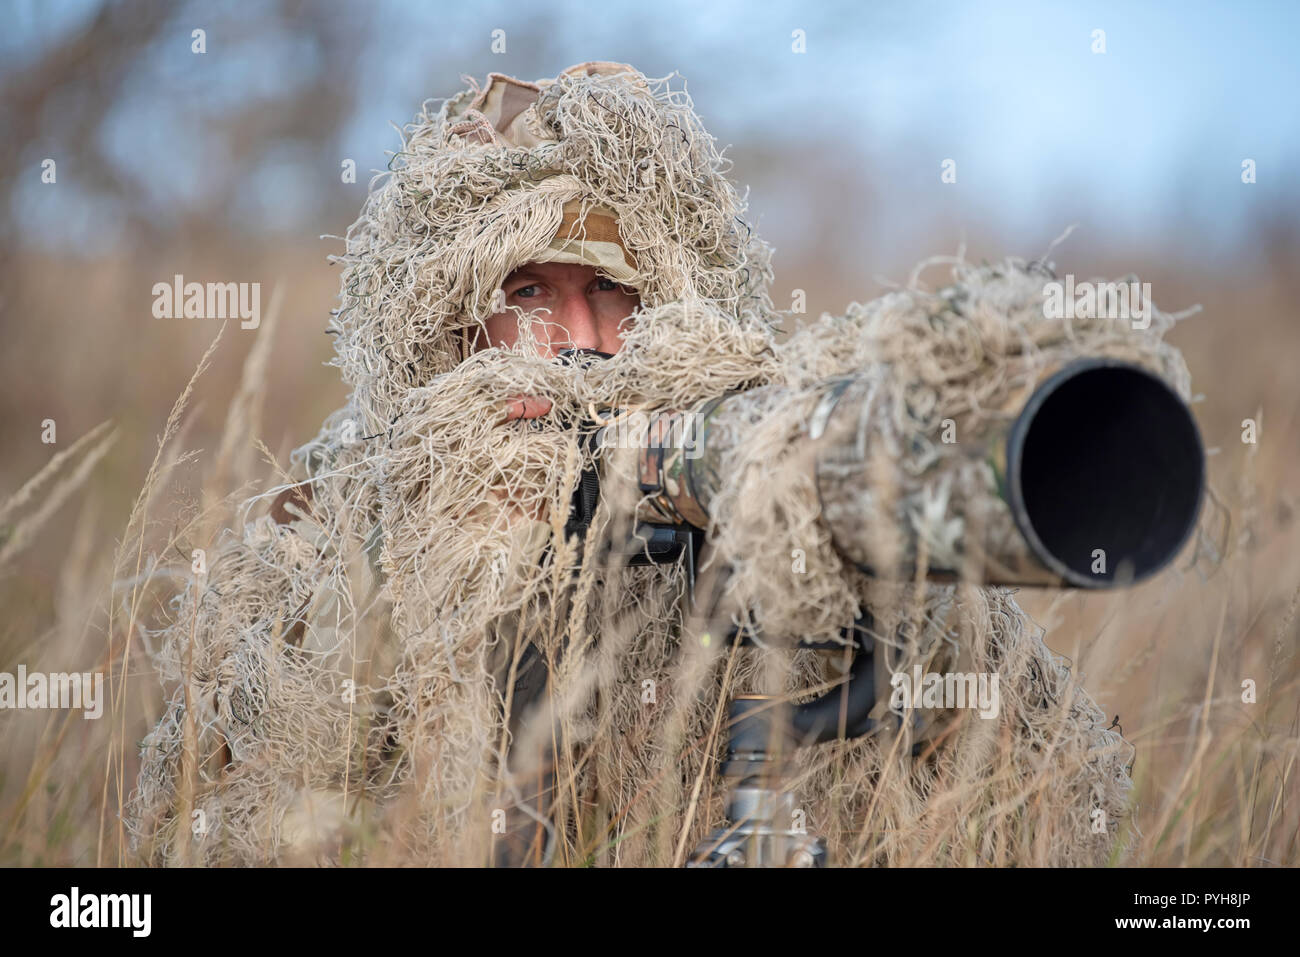 Camouflage wildlife photographer in the ghillie suit working in the wild Stock Photo